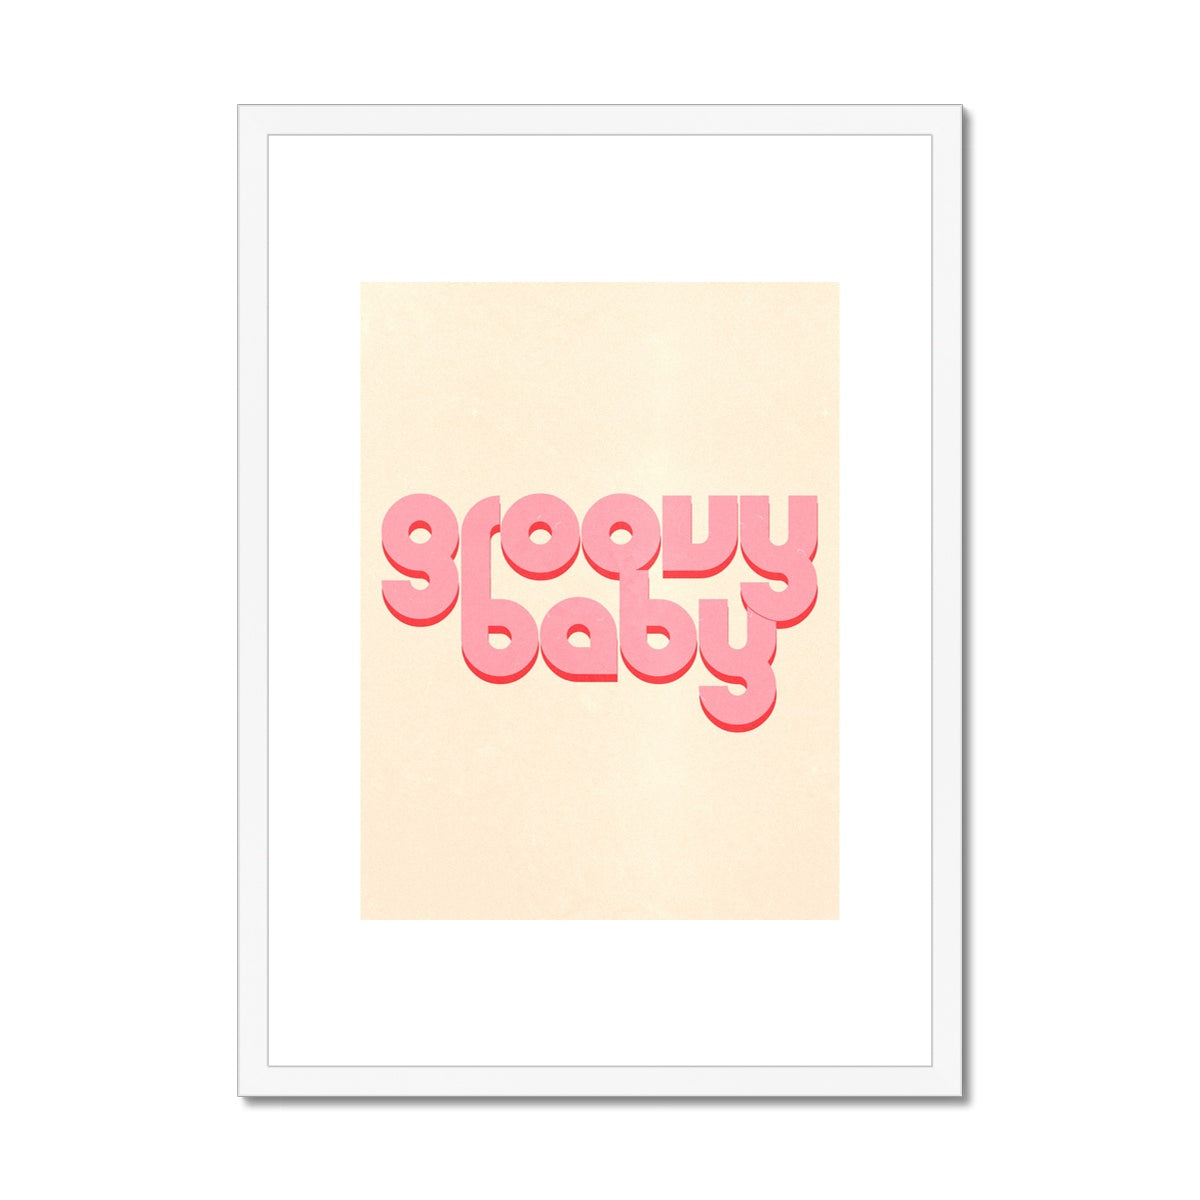 groovy baby Framed & Mounted Print